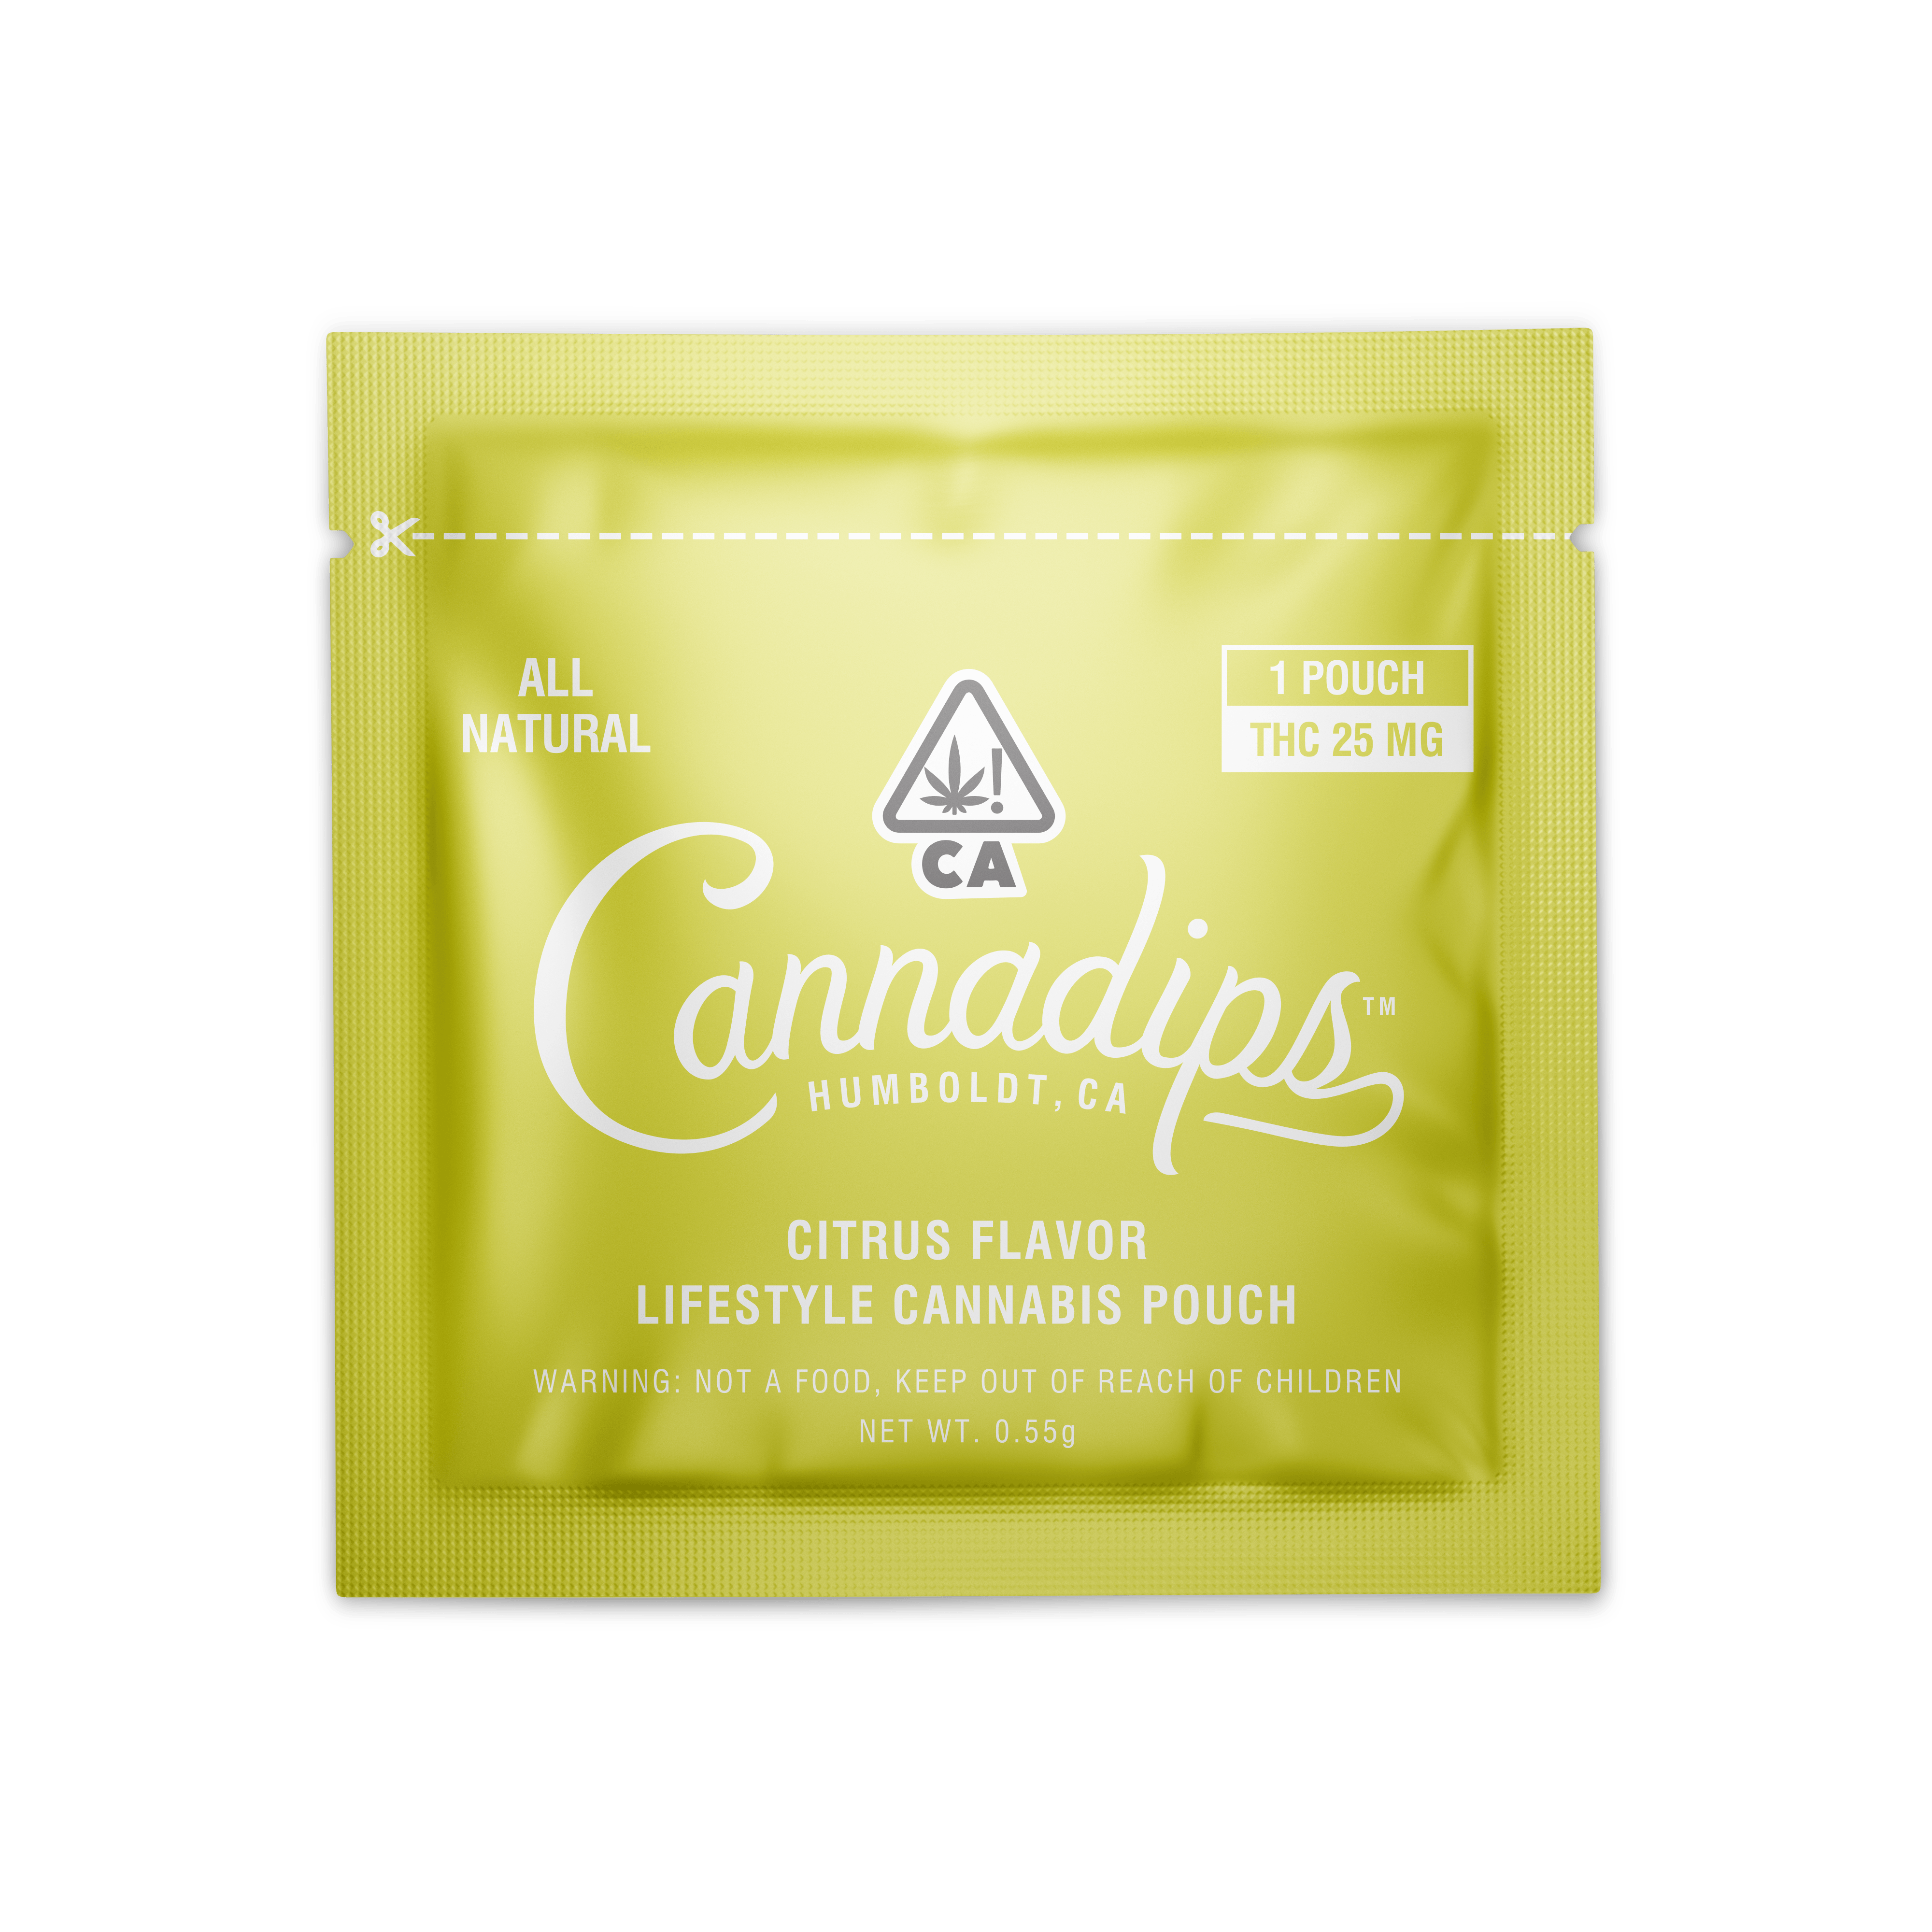 marijuana-dispensaries-green-cross-pharma-rancho-mirage-2c-palm-springs-2c-palm-desert-in-cathedral-city-cannadips-citrus-pouches-thc-2c-high-dose-single